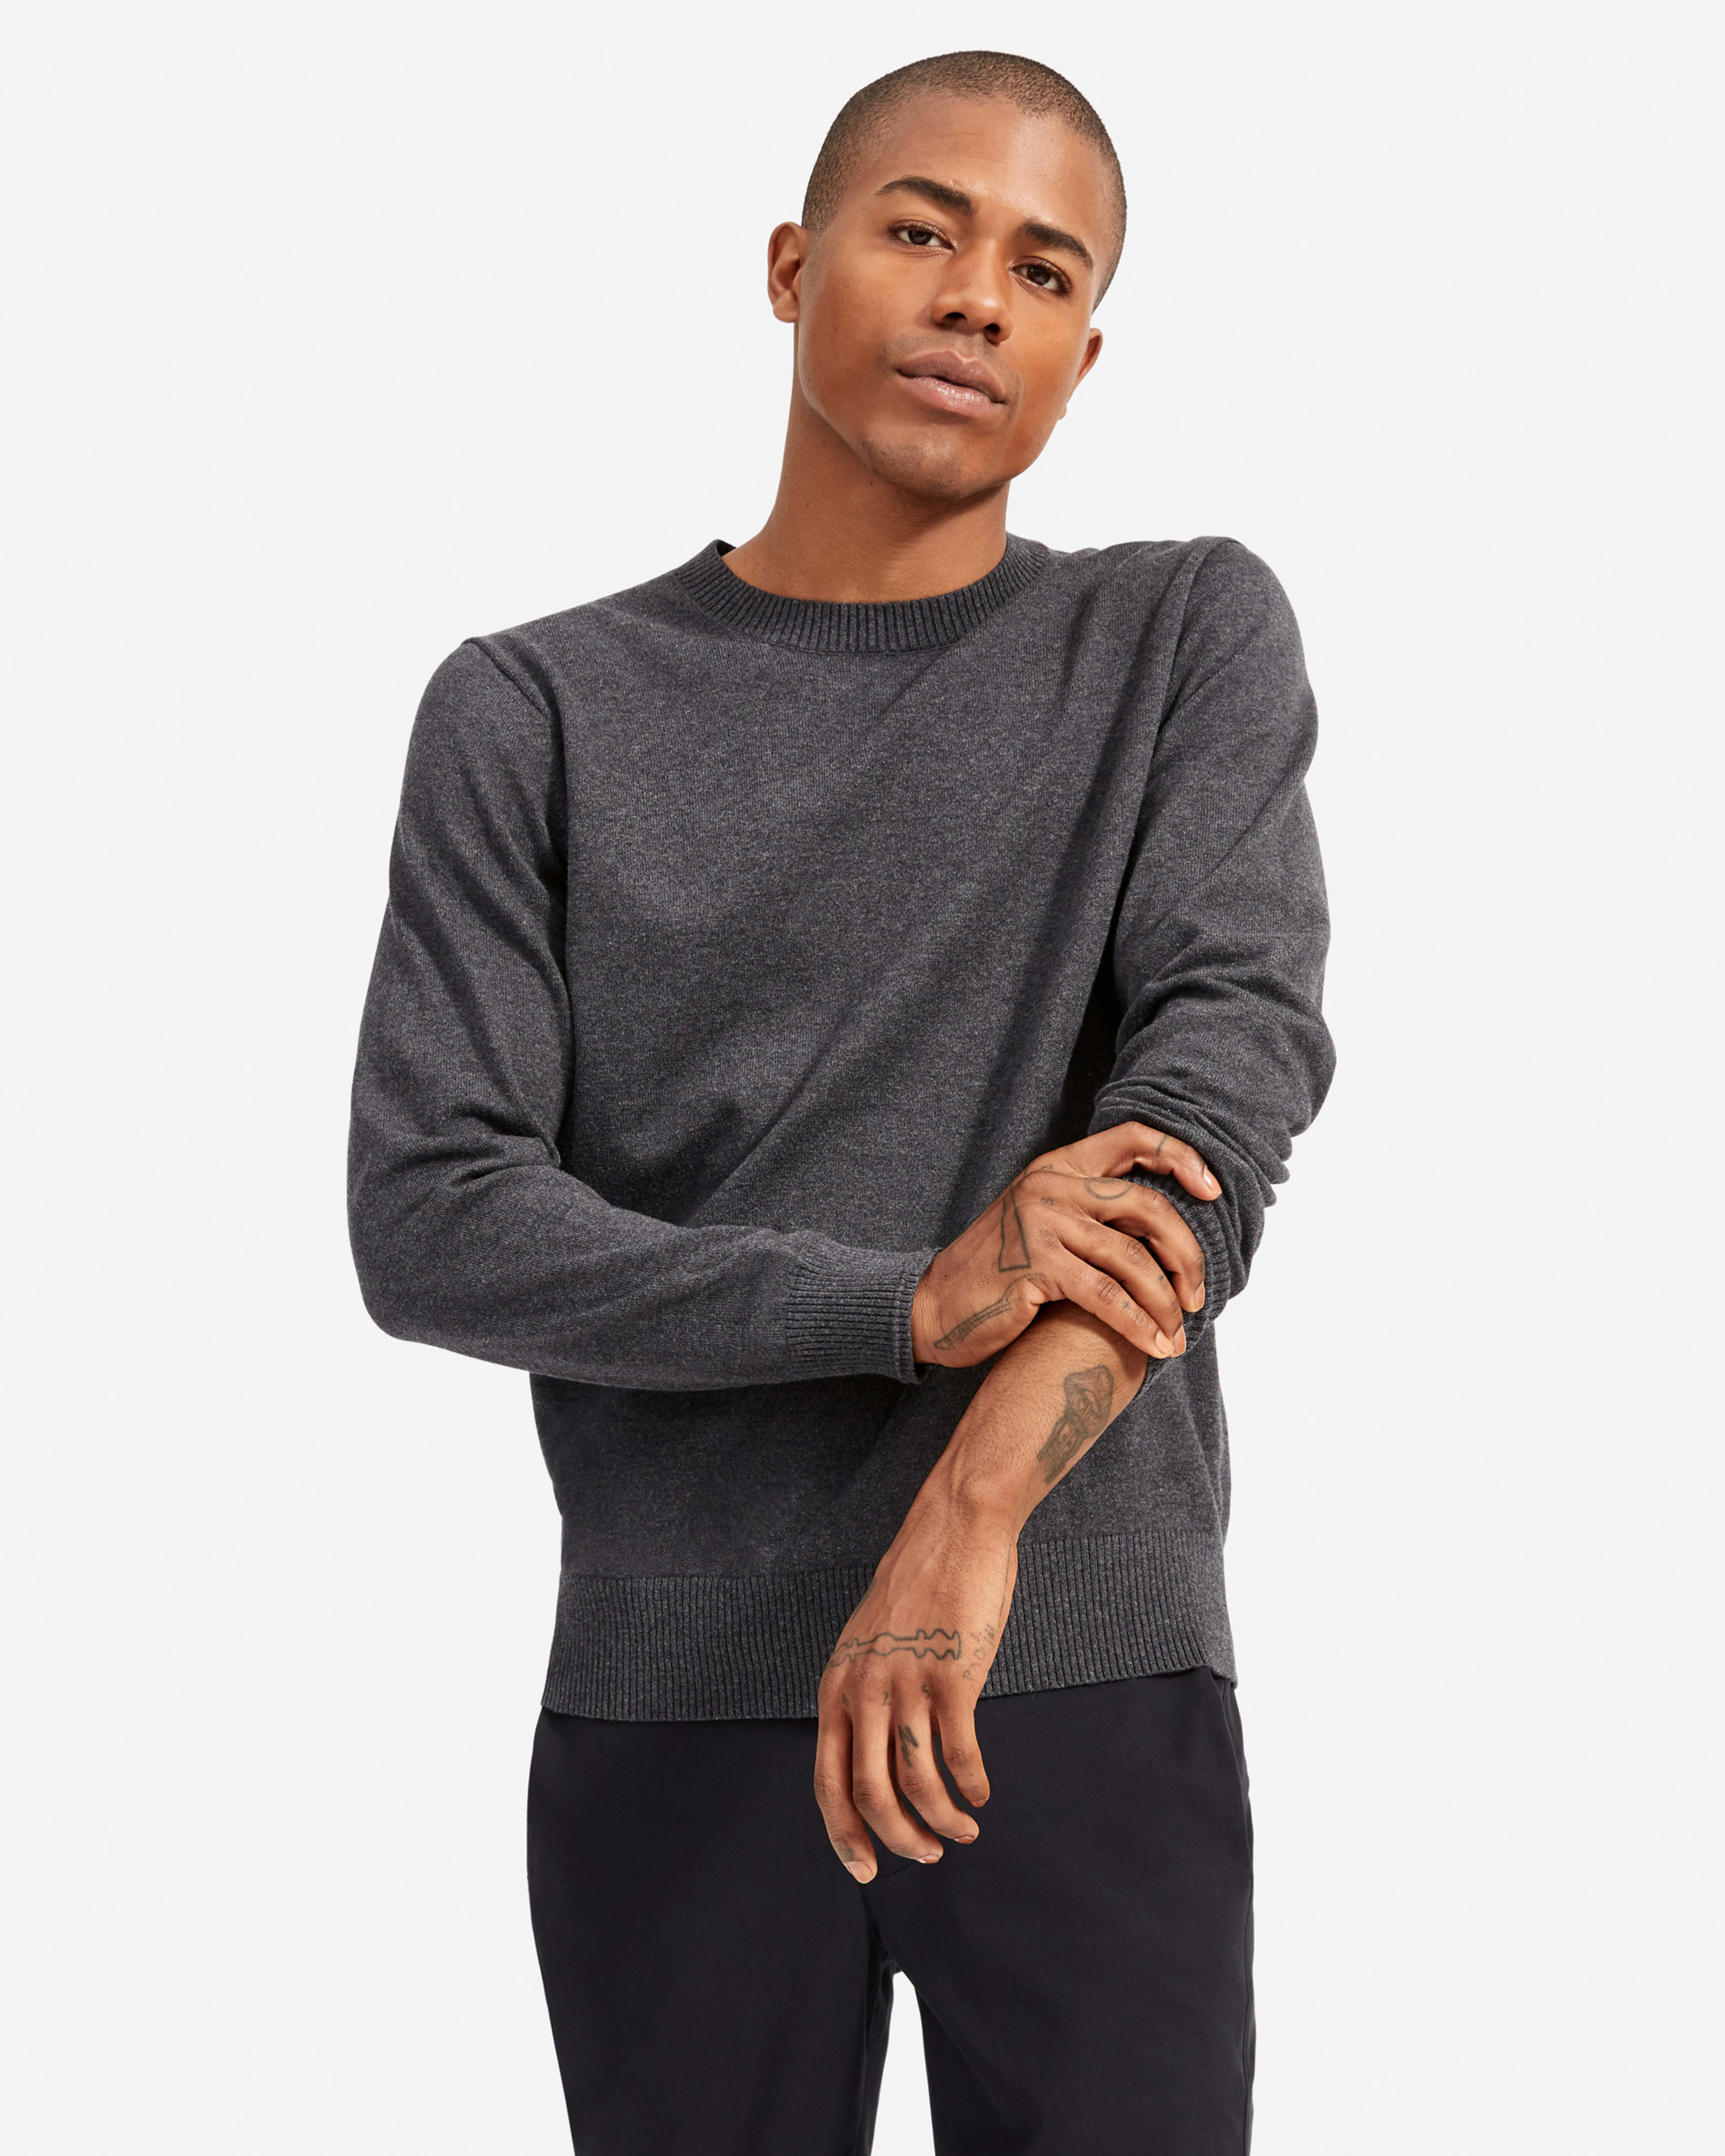 Men's Cashmere Sweaters - Our Collection